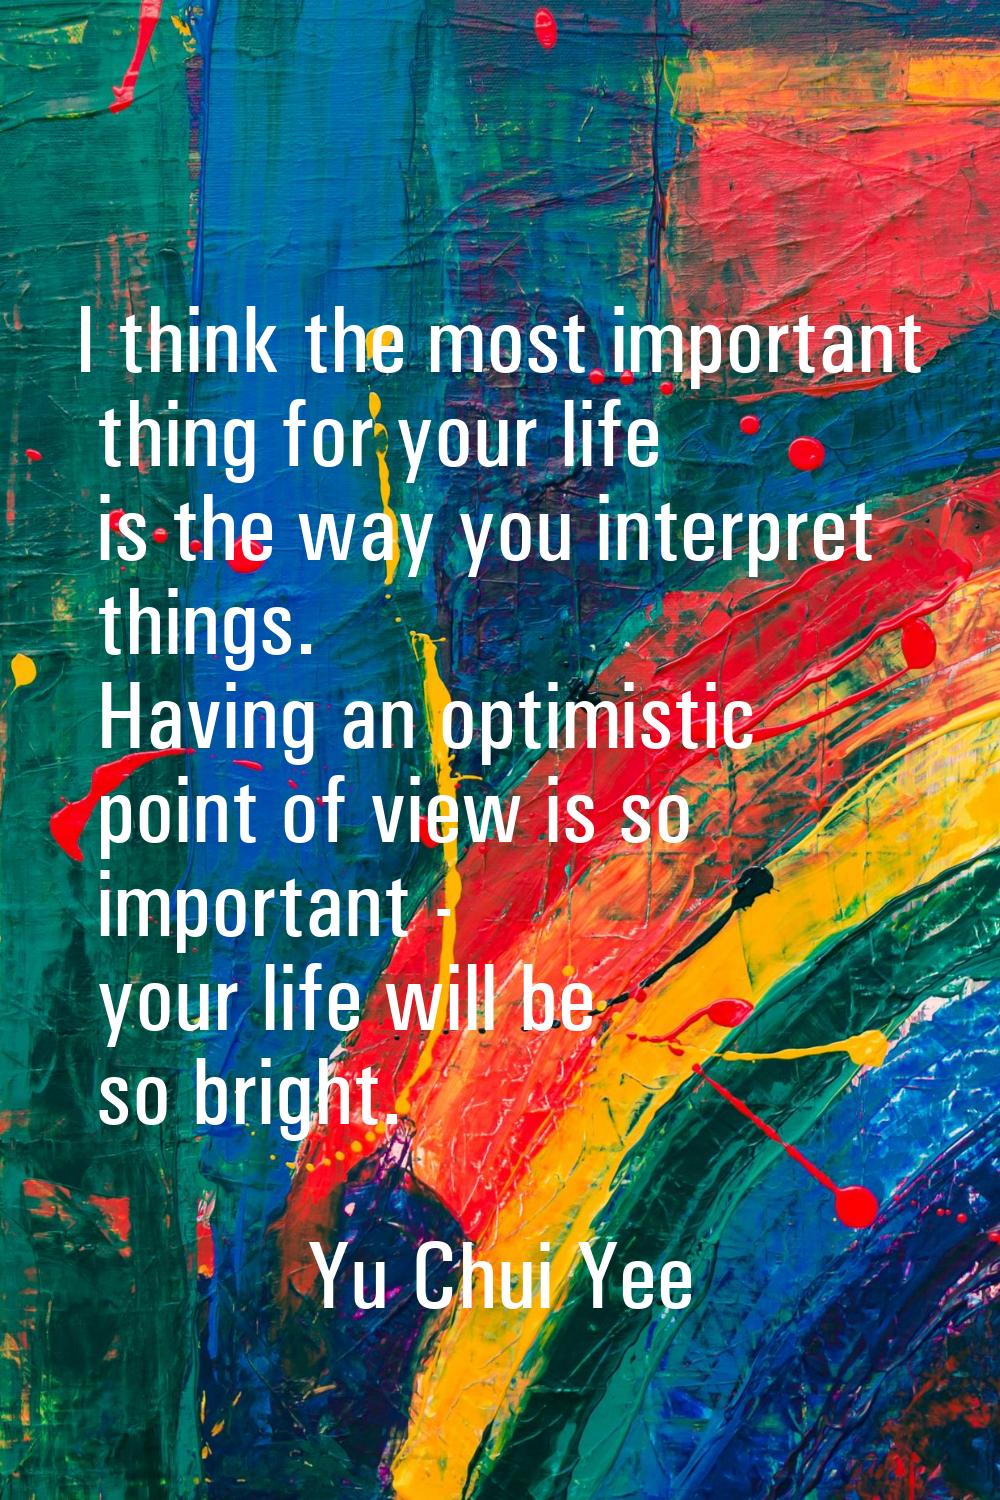 I think the most important thing for your life is the way you interpret things. Having an optimisti